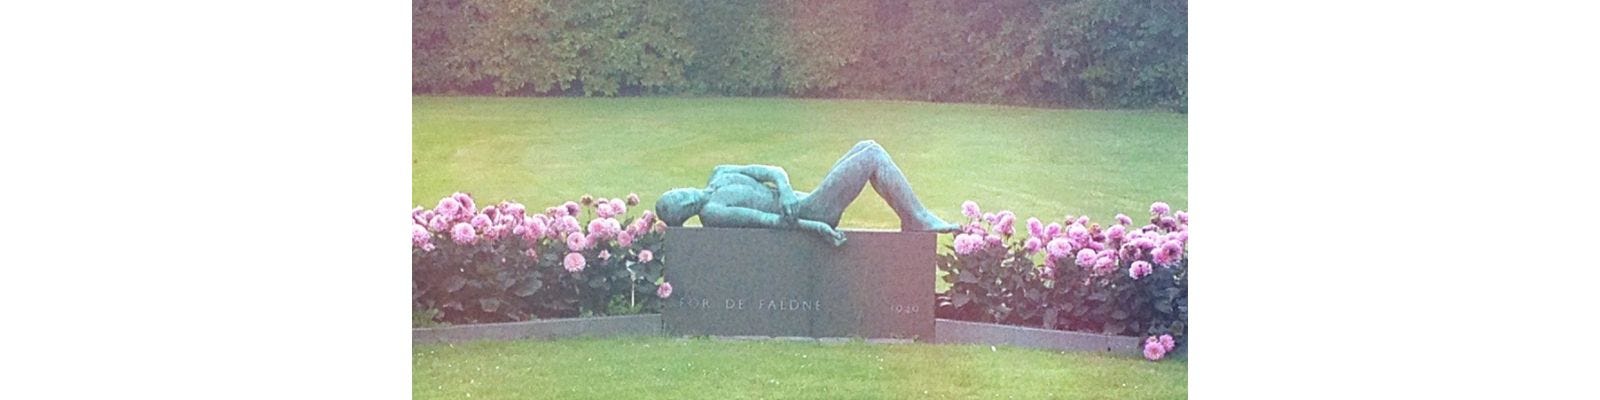 A verdigris bronze figure lying on a low, polished stone plinth, pink dahlias at either side, green cemetery lawn behind, looks like a misty, late afternoon